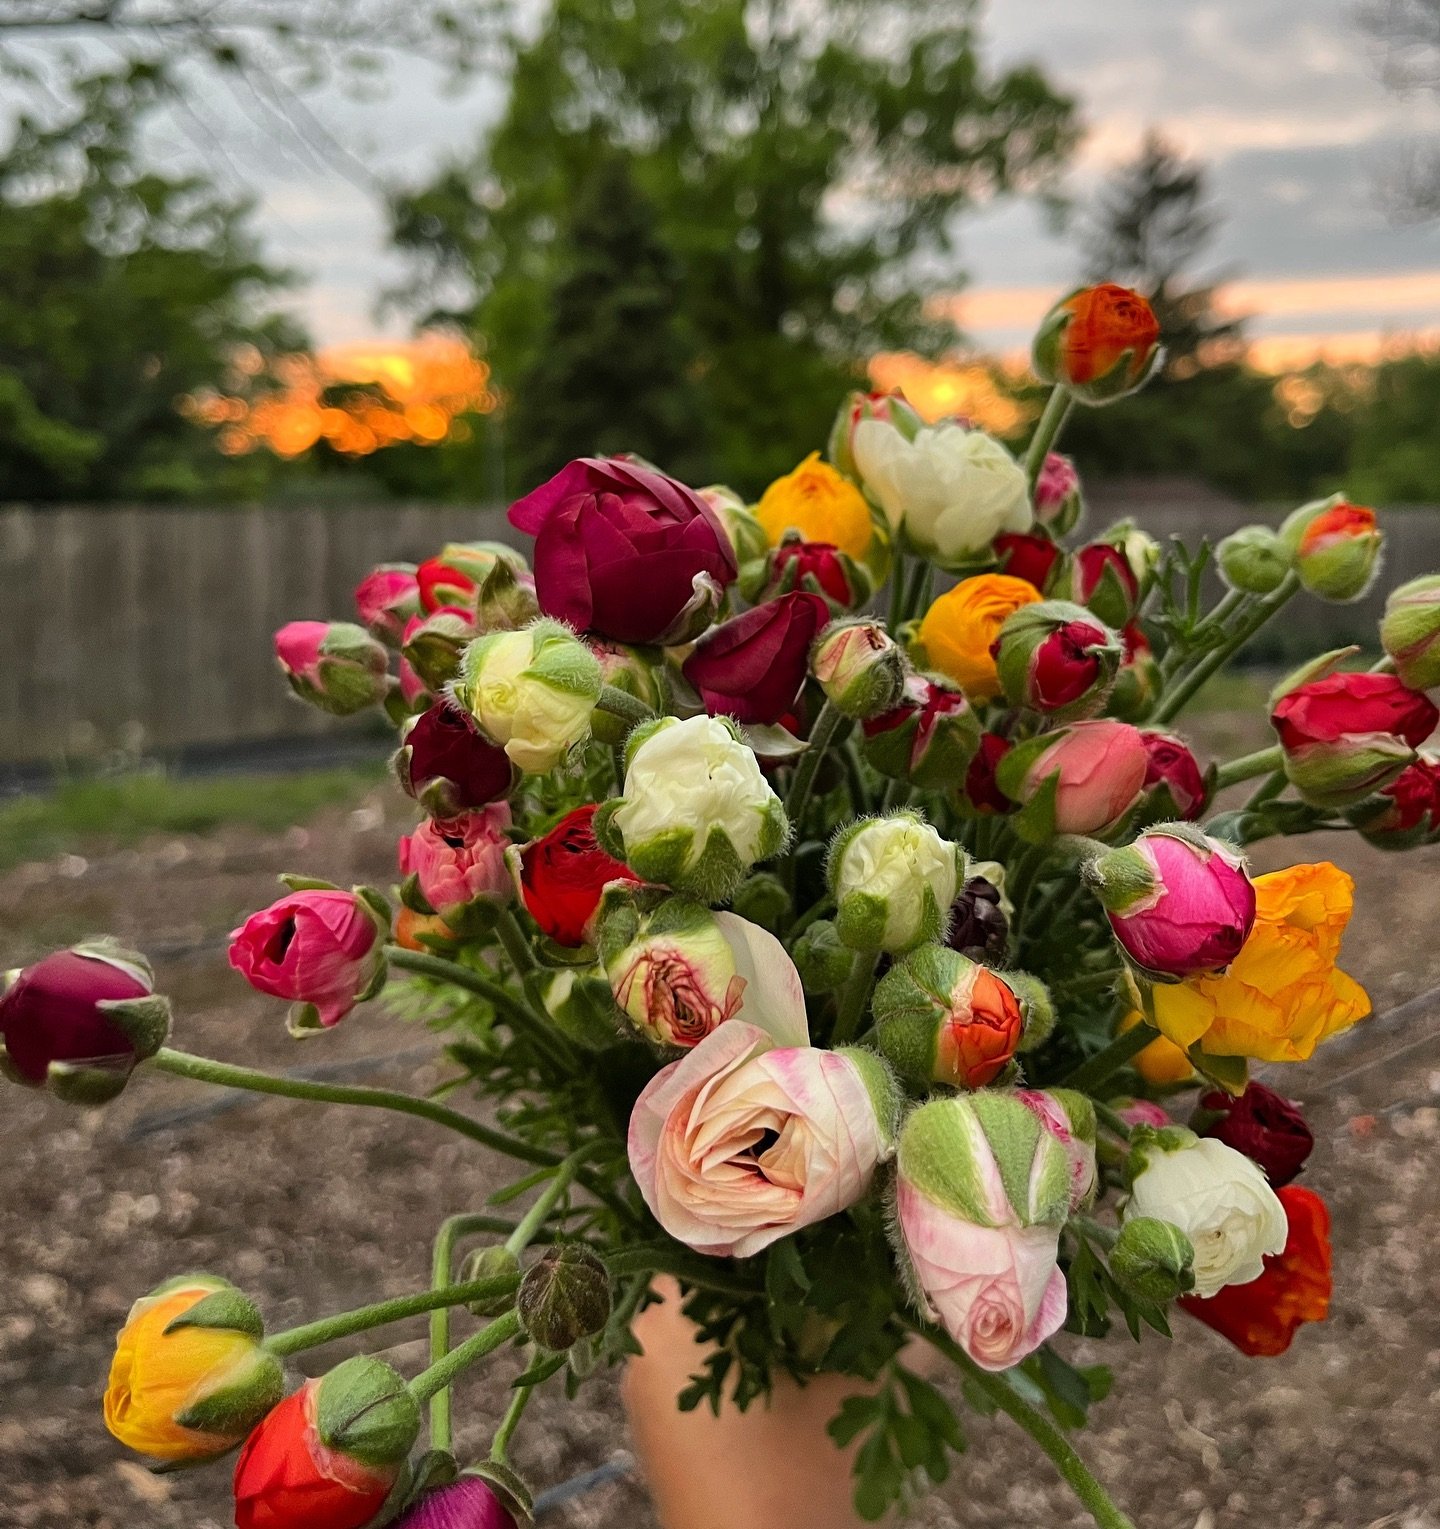 We have a few spots left to pre-order flowers for Mother's Day 🌸 Bouquets will be filled with ranunculus &amp; tulips from our farm, along with other colorful spring blooms for $30 each and includes a handmade card. We also offer gift certificates a